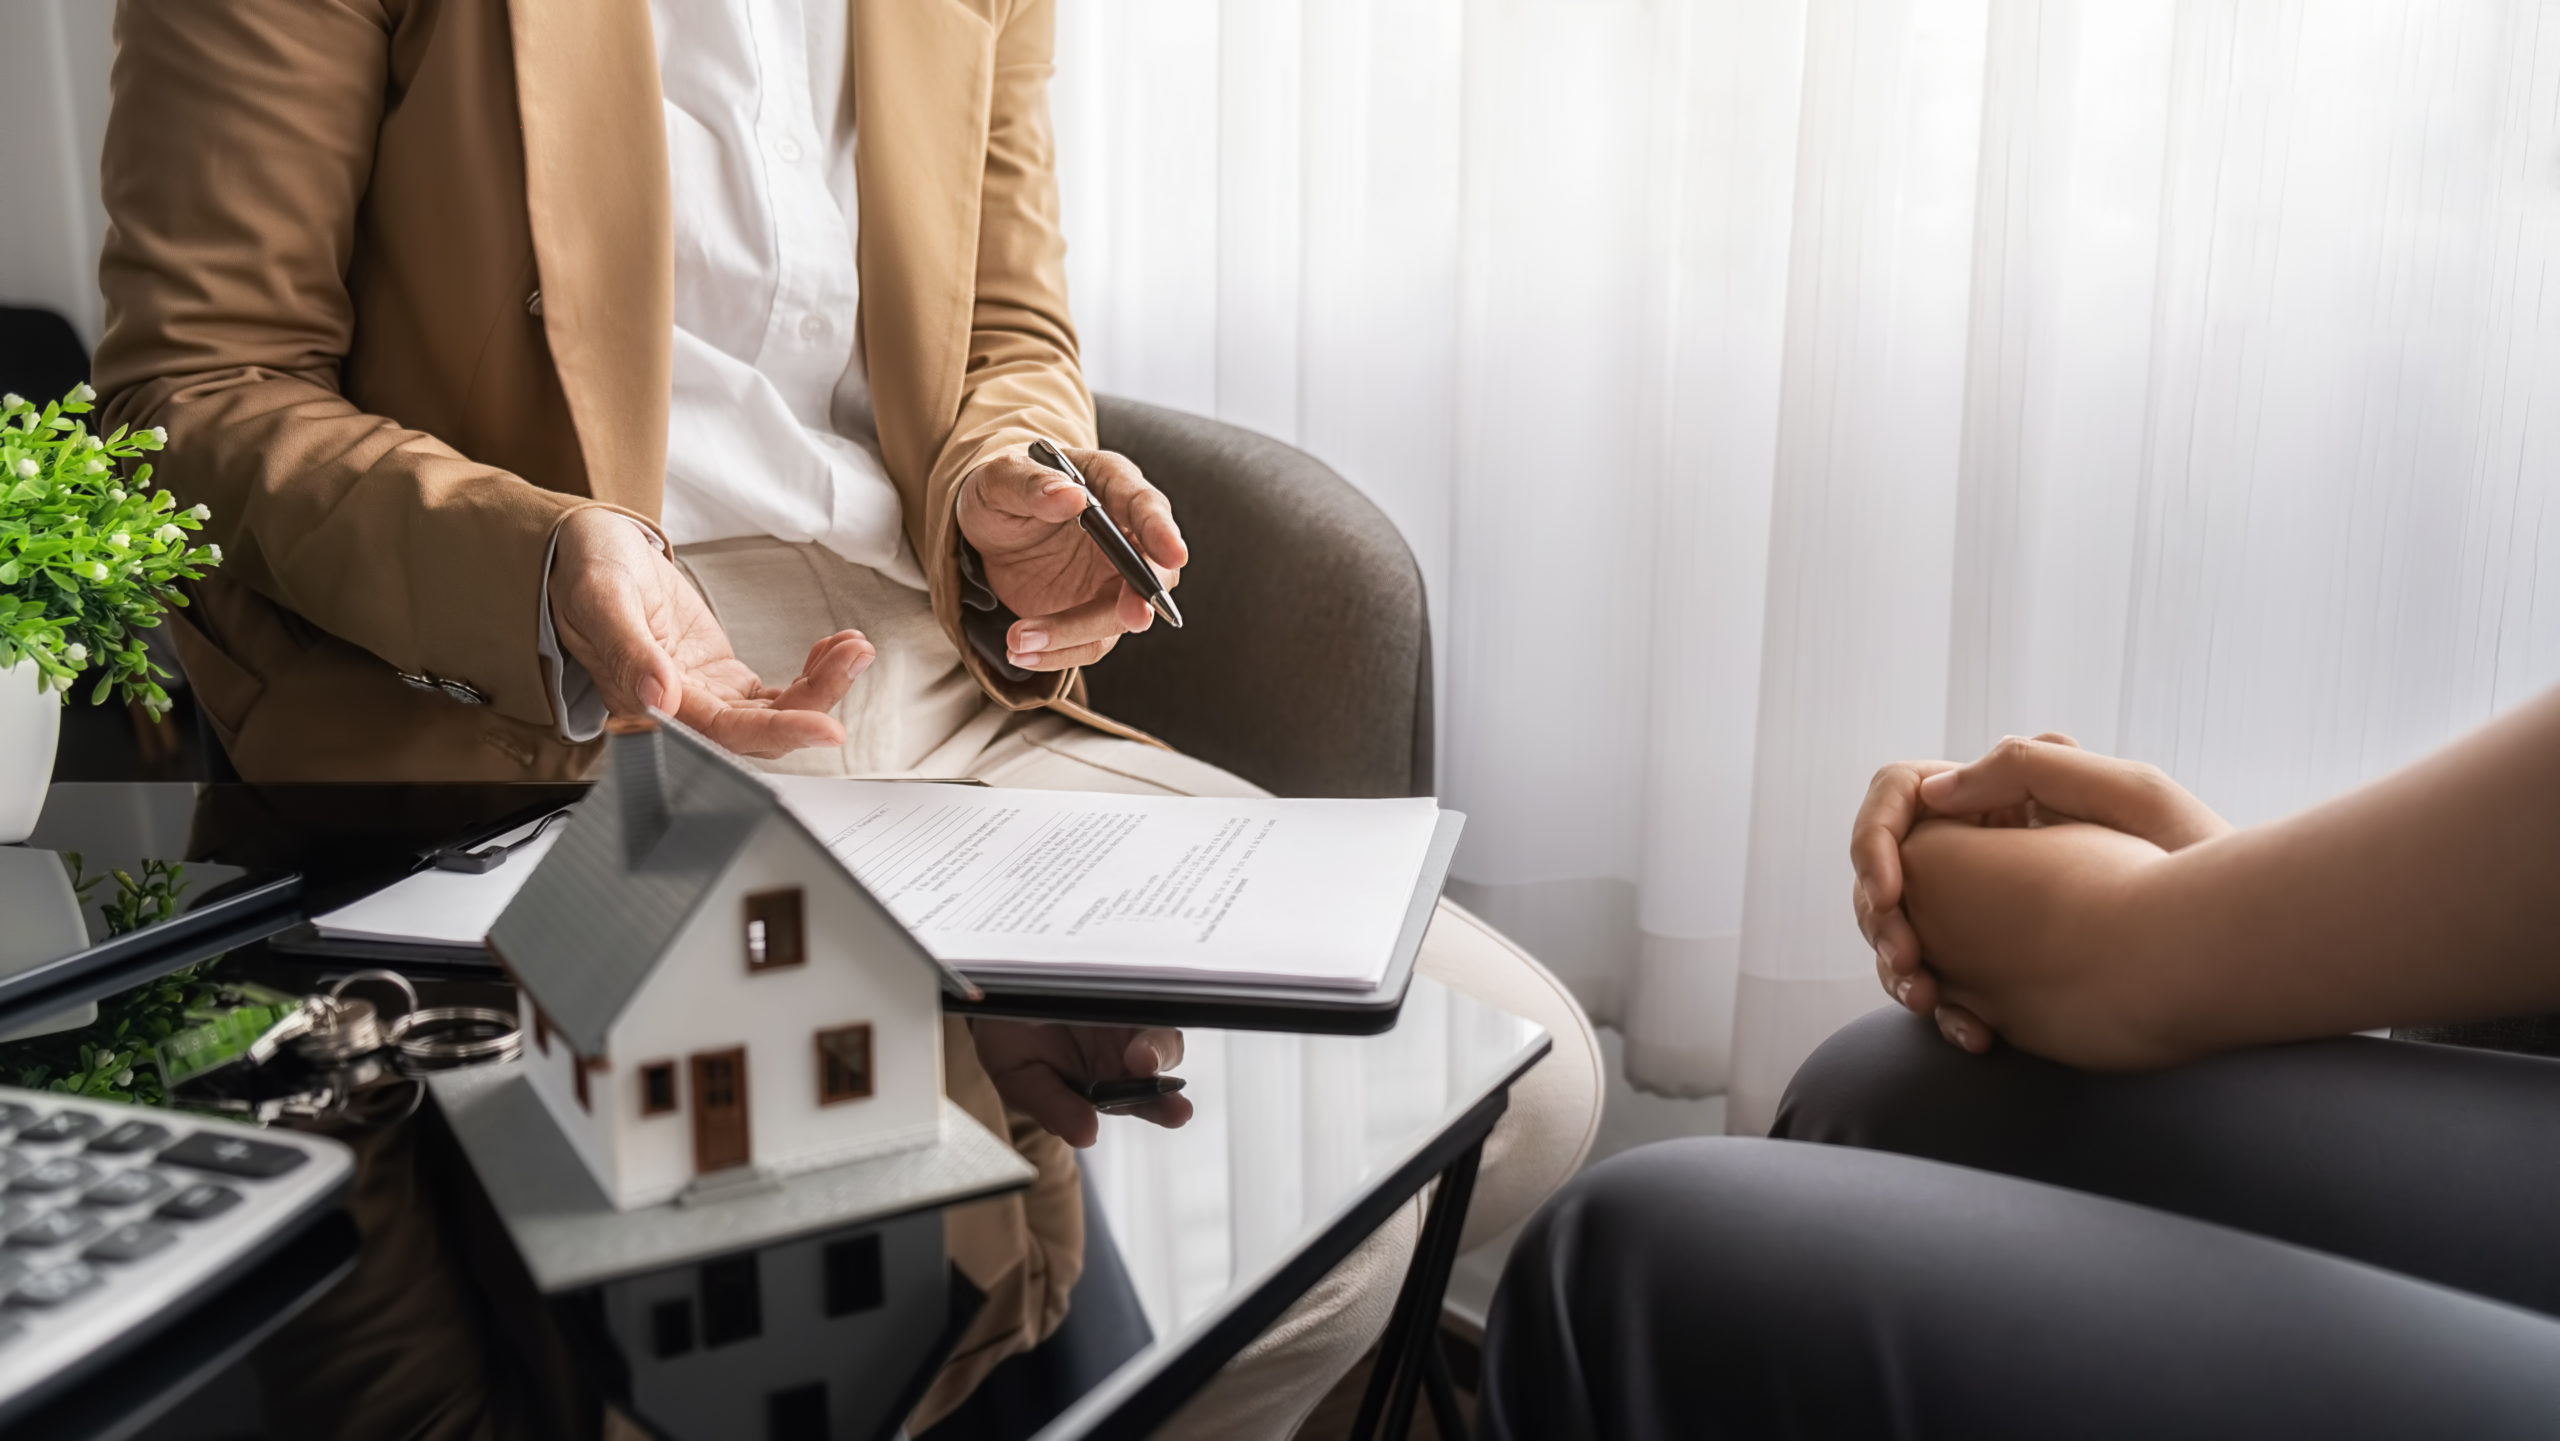 We are getting divorced – Do I have to sell the house?